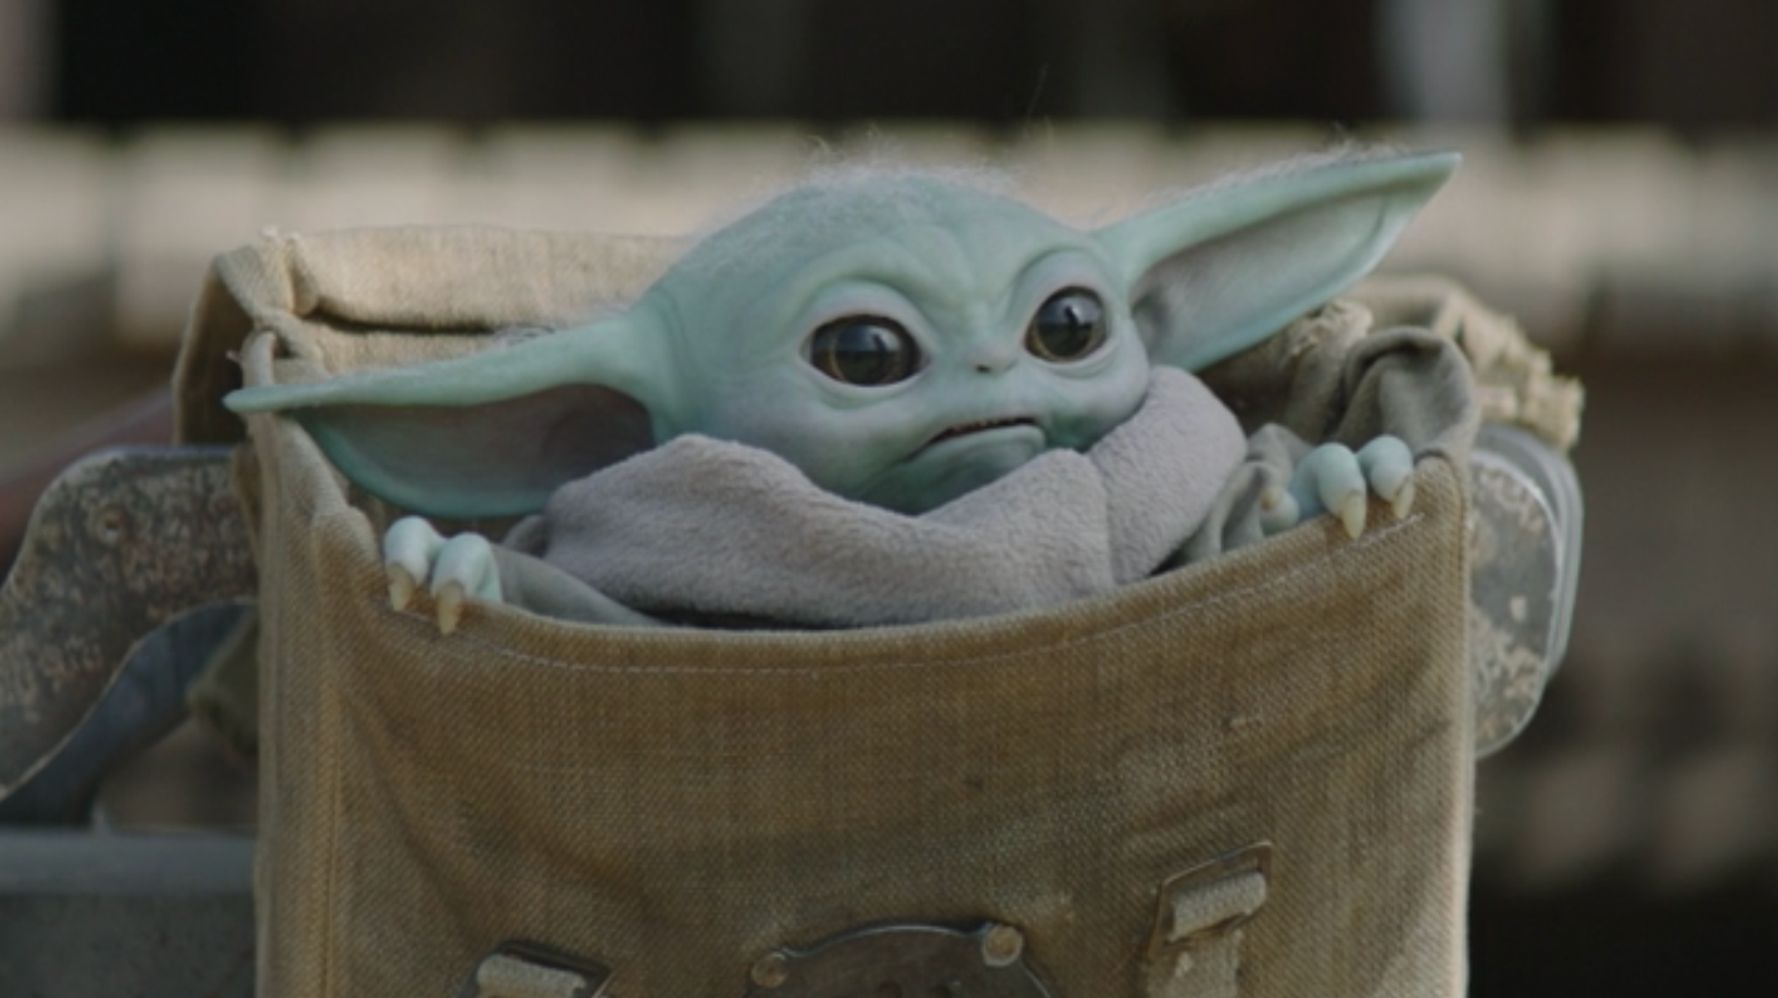 The Mandalorian' may never reveal Baby Yoda's true origins. But Native  Americans already know.